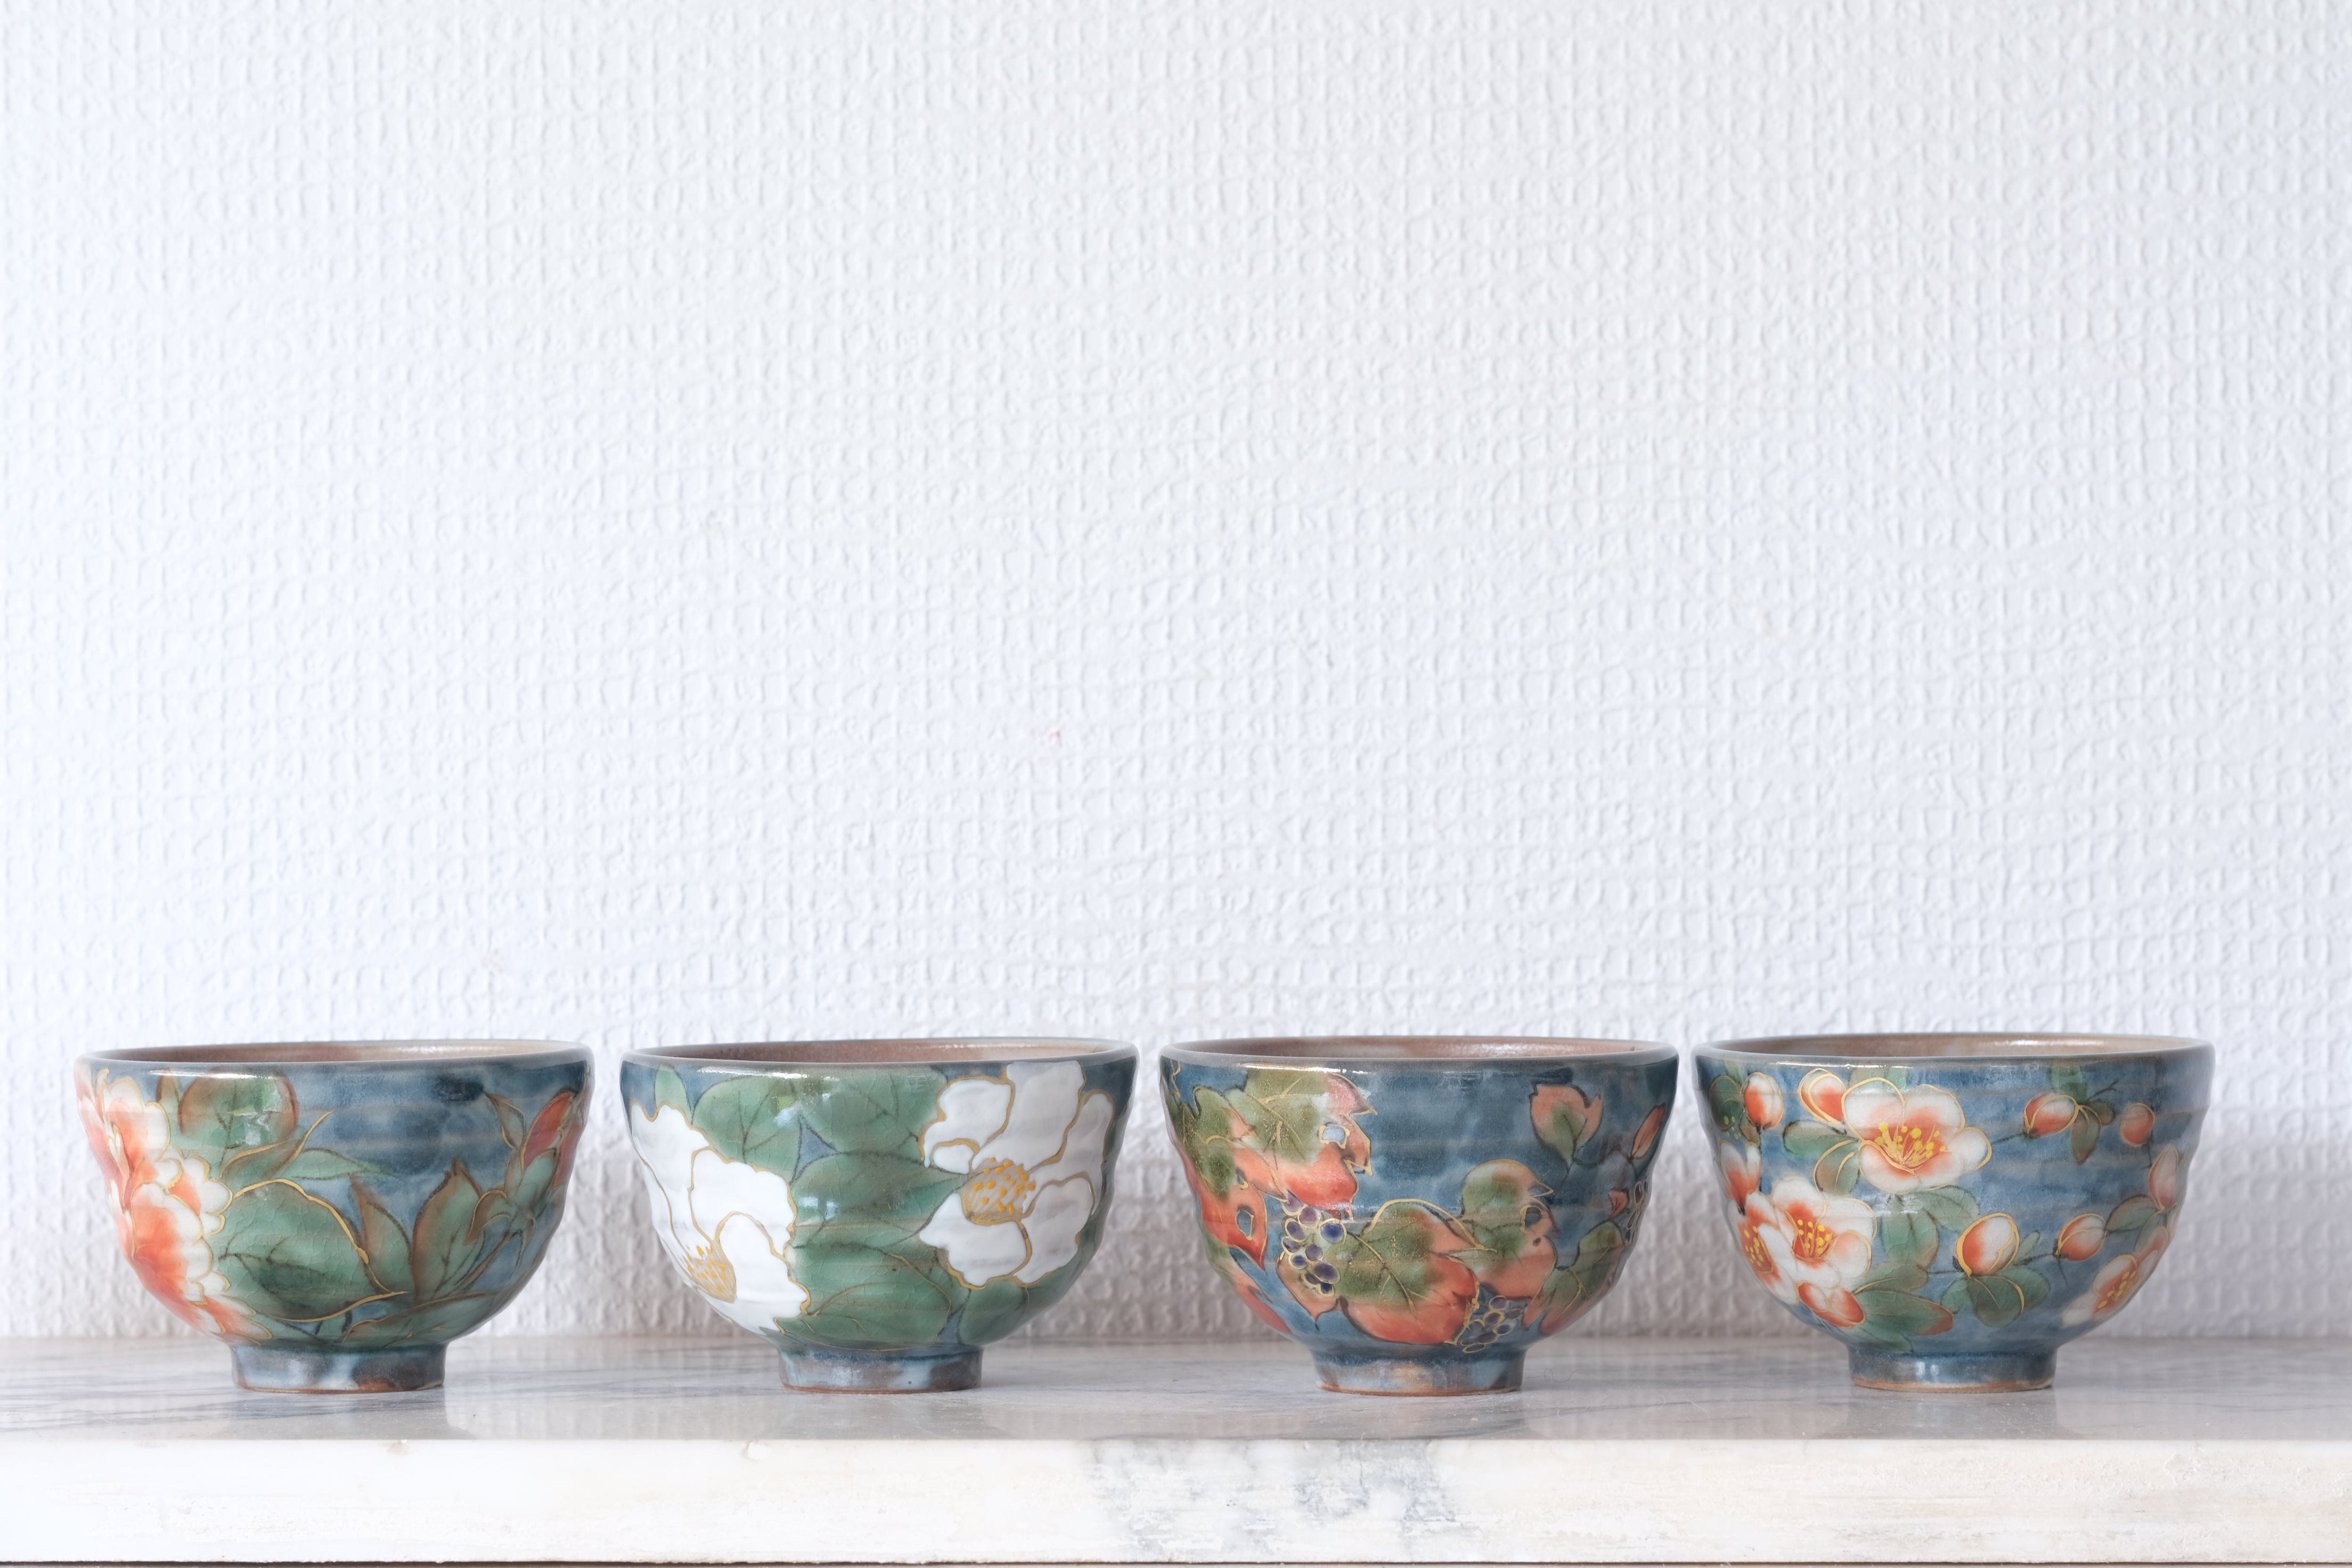 Four Japanese Ceramic Bowls with Flowers | | 6 cm